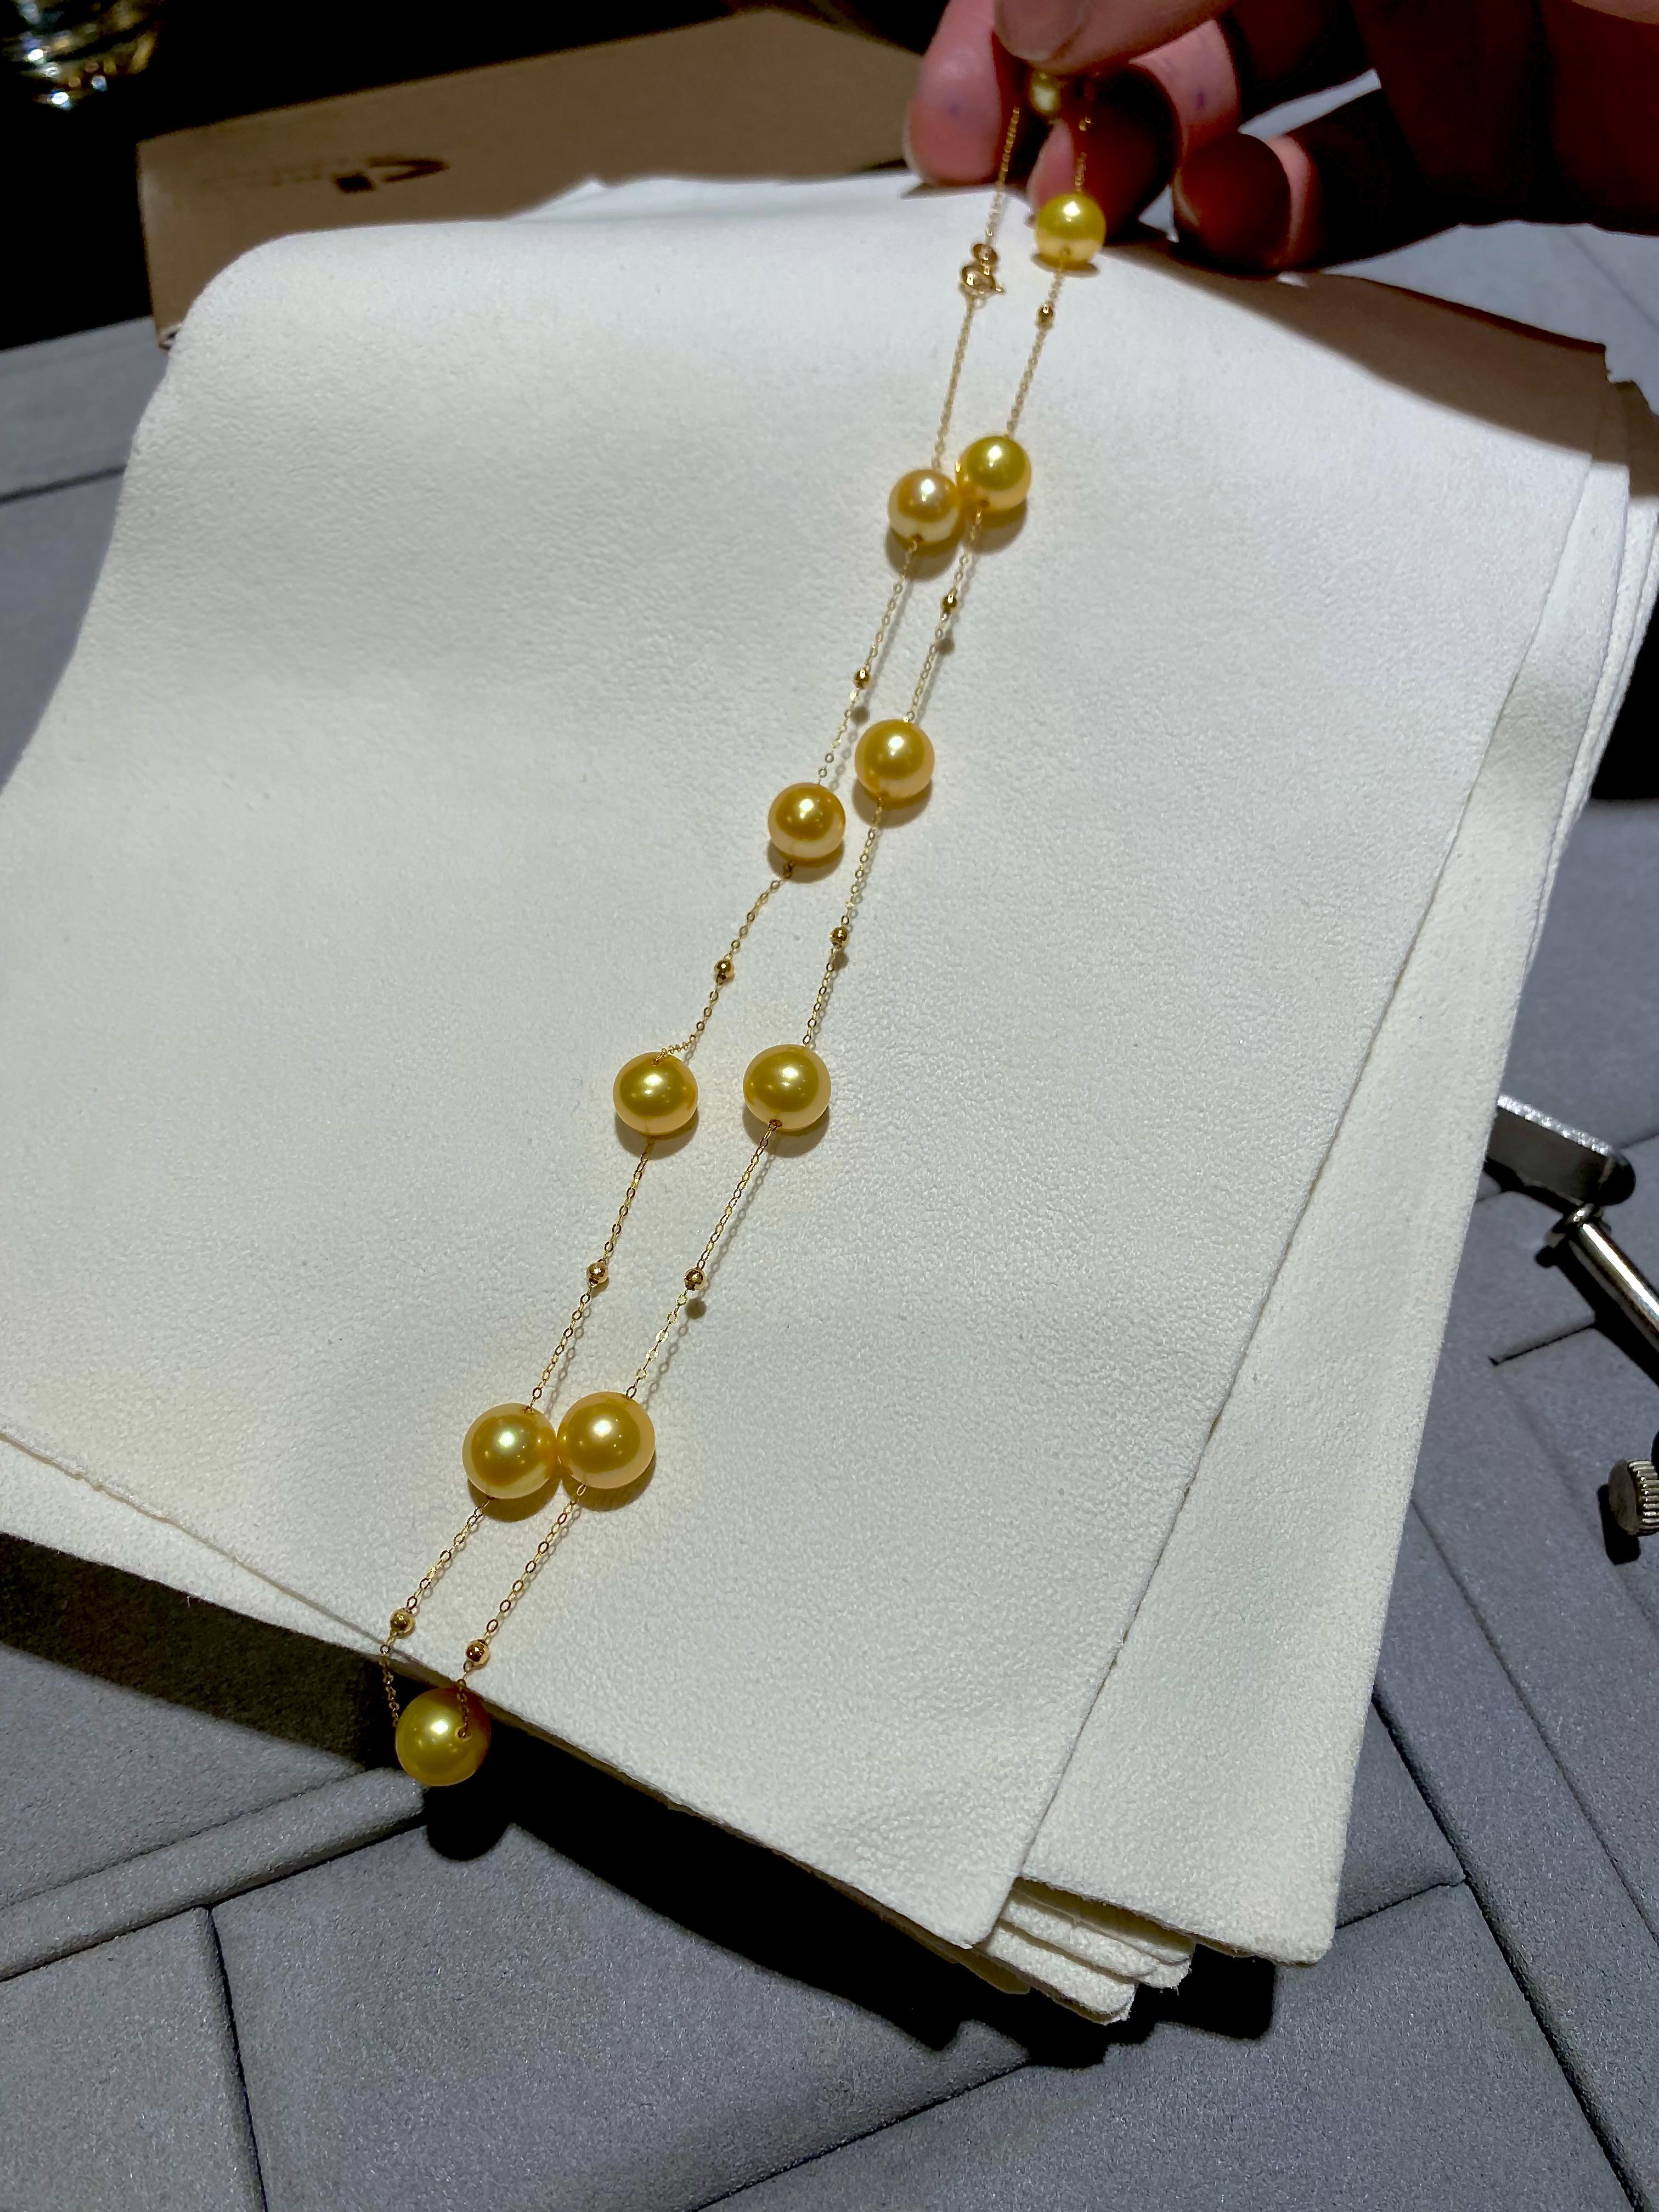 A 8mm-9mm Golden Colour South Sea Pearl Necklace with 18k Gold Clasp and Chain. The Pearls and Gold beads are alternating on the chain and symbolizes different sizes of stars in the sky. This design is also called 